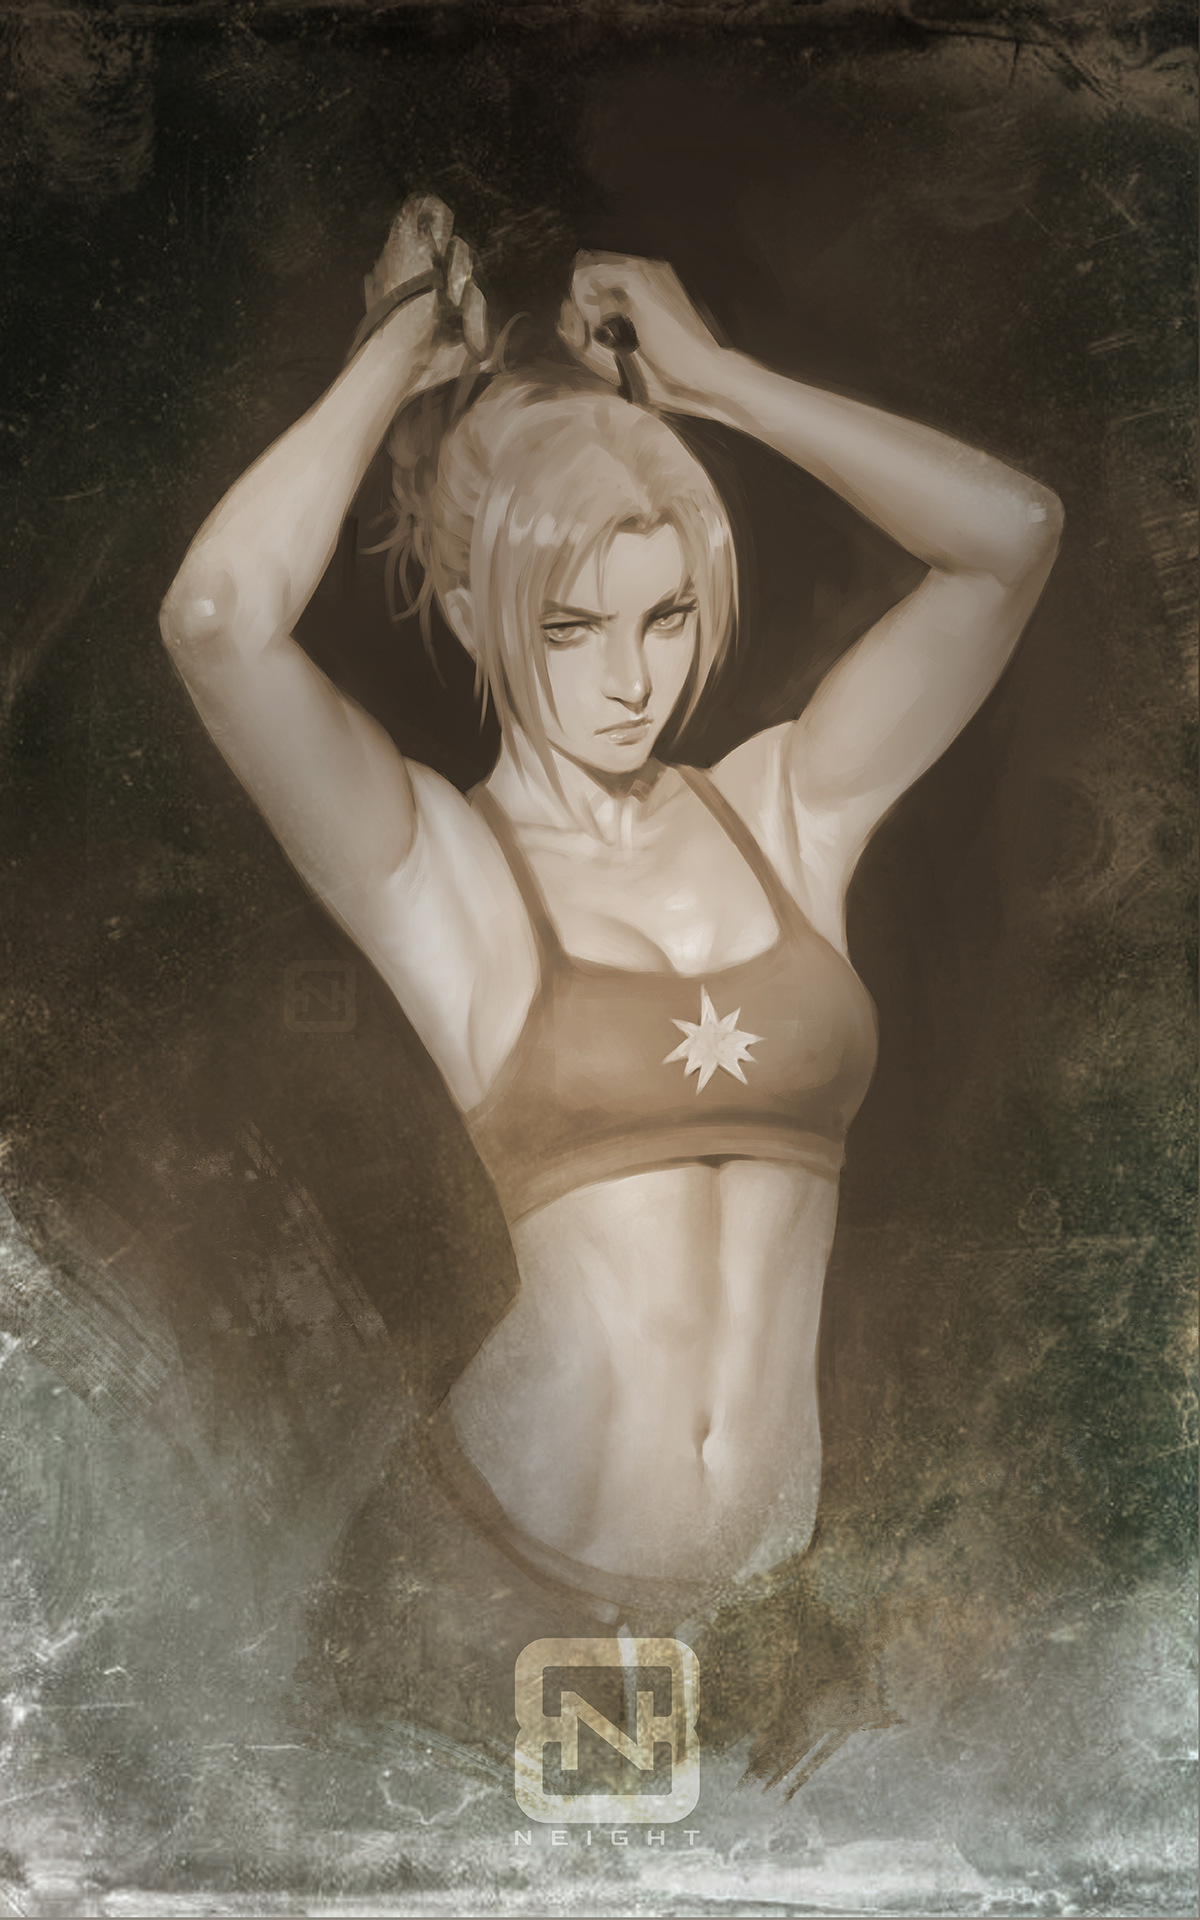 Anime 1200x1920 Shingeki no Kyojin cleavage curvy ecchi anime girls female soldier arms up sports bra muscles abs biceps 6-pack belly button looking at viewer 2D long hair Annie Leonhart monochrome anime portrait display tied hair belly bangs armpits alternate costume bare shoulders women indoors fan art